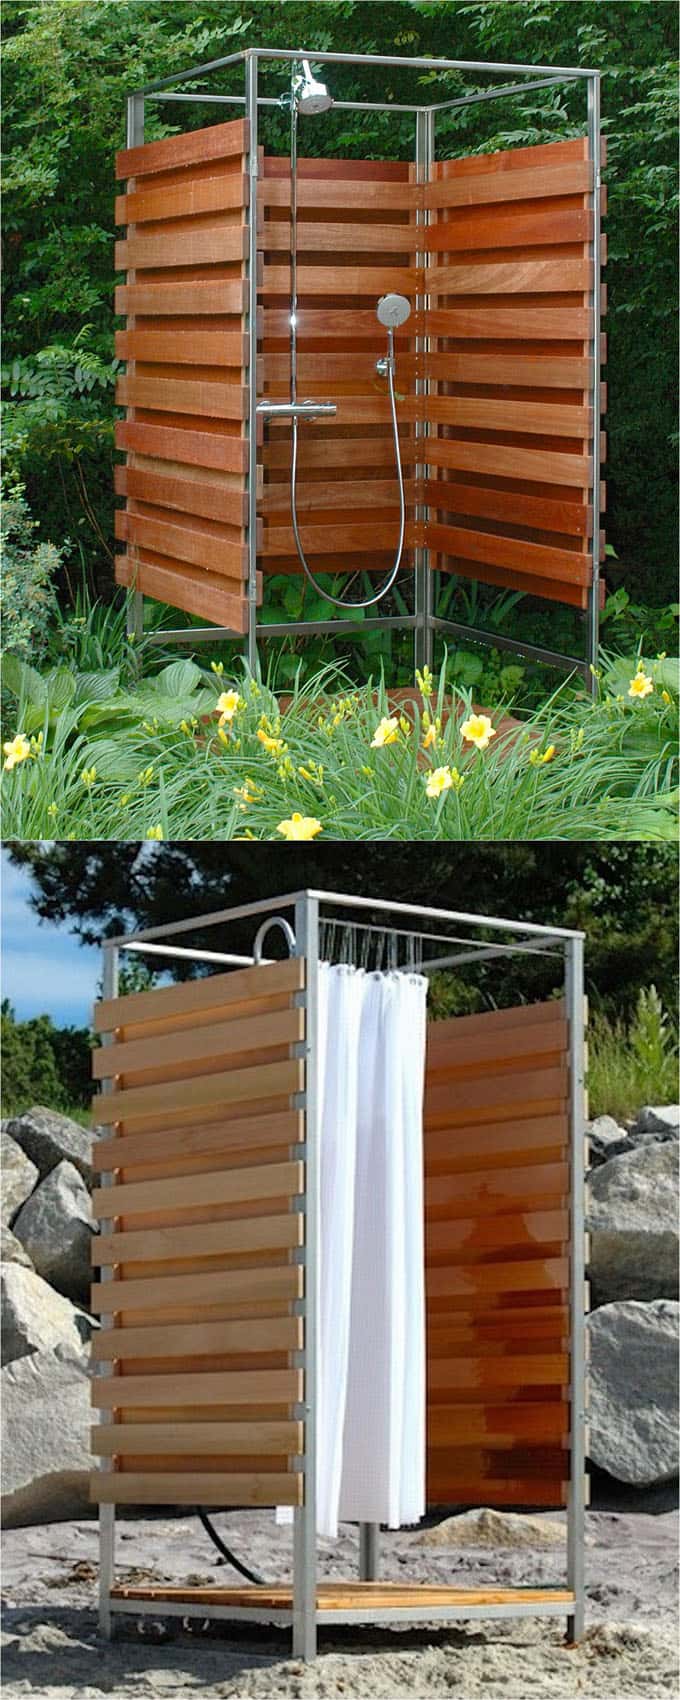 32 Beautiful DIY Outdoor Shower Ideas ( for the Best Summer Ever ) - A